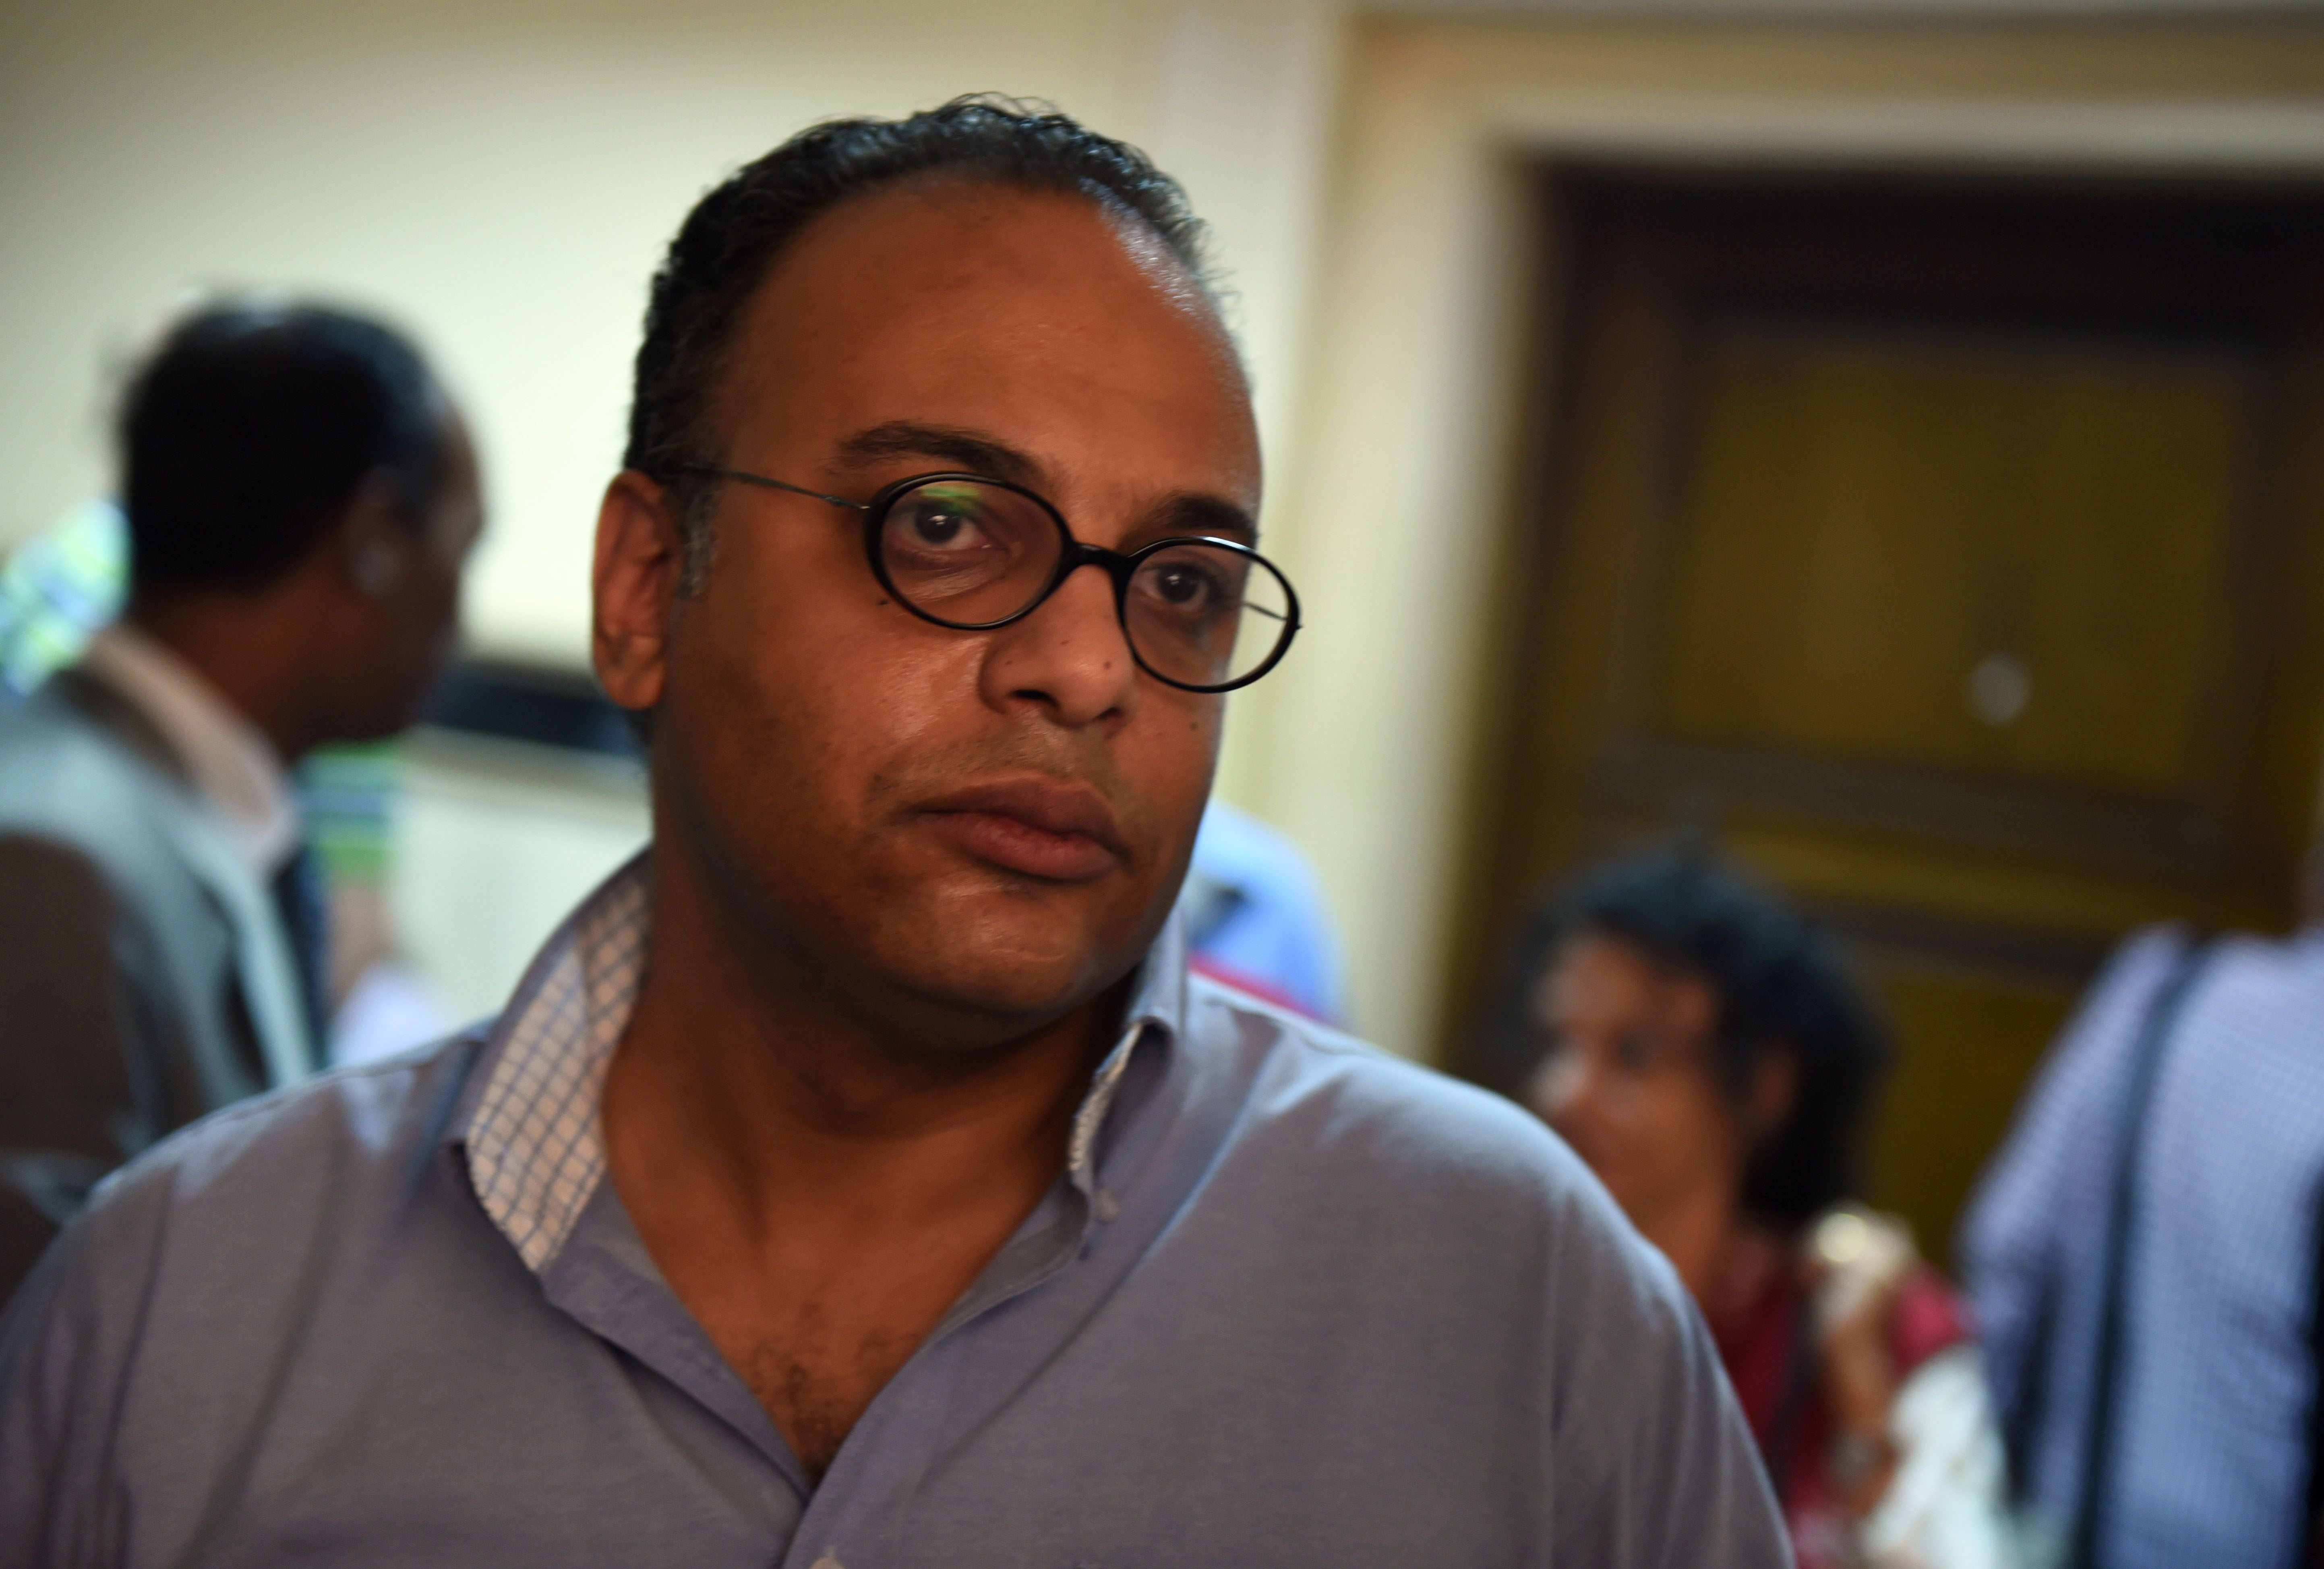 Human rights activist Hossam Bahgat pictured in 2016.